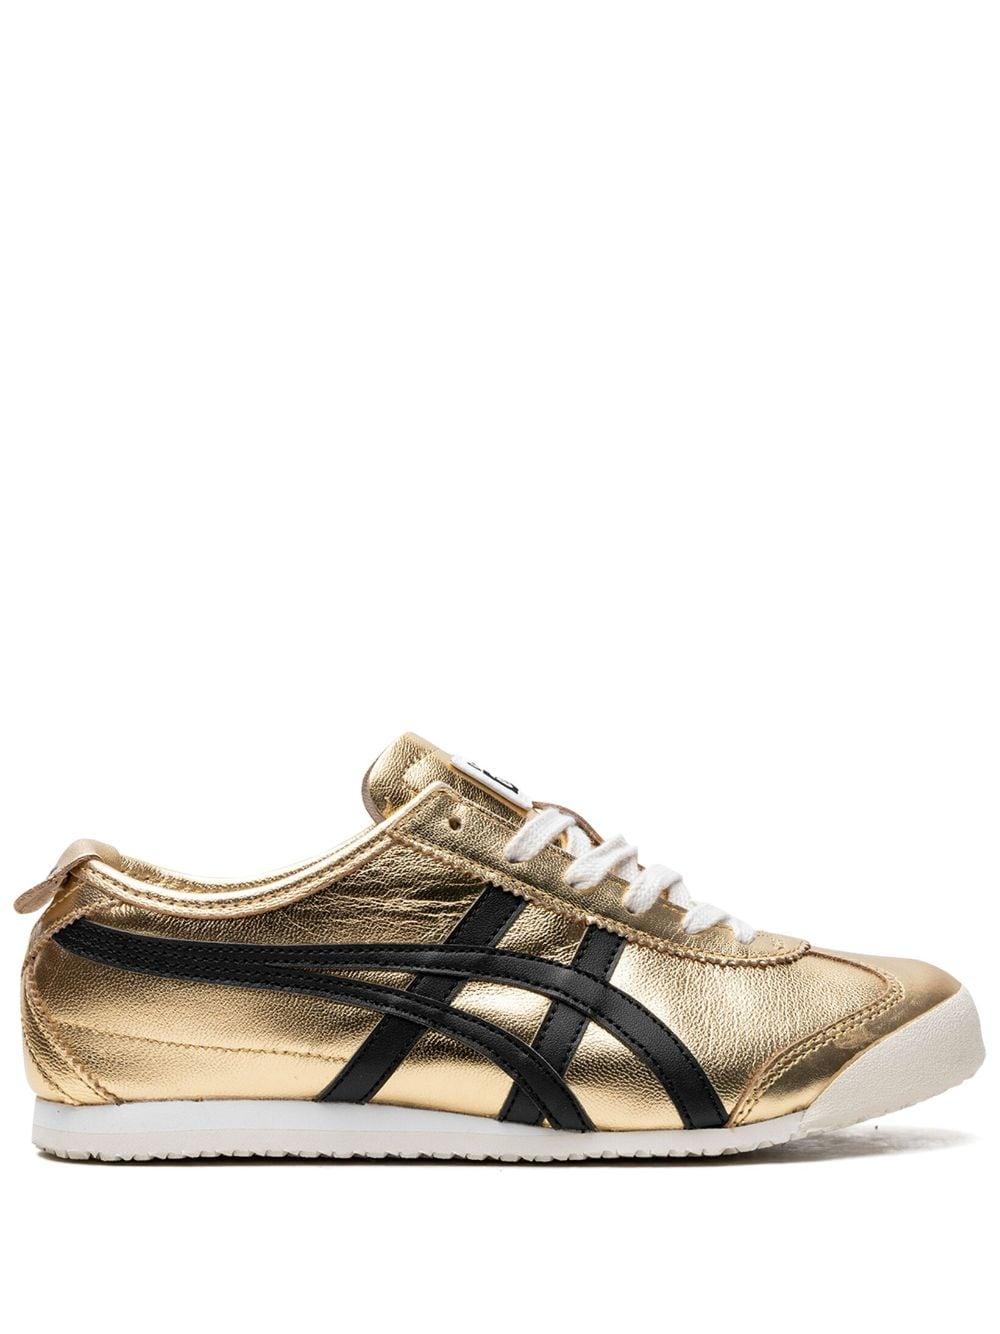 Onitsuka Tiger Mexico 66 "gold / Black" Sneakers in Brown for Men | Lyst